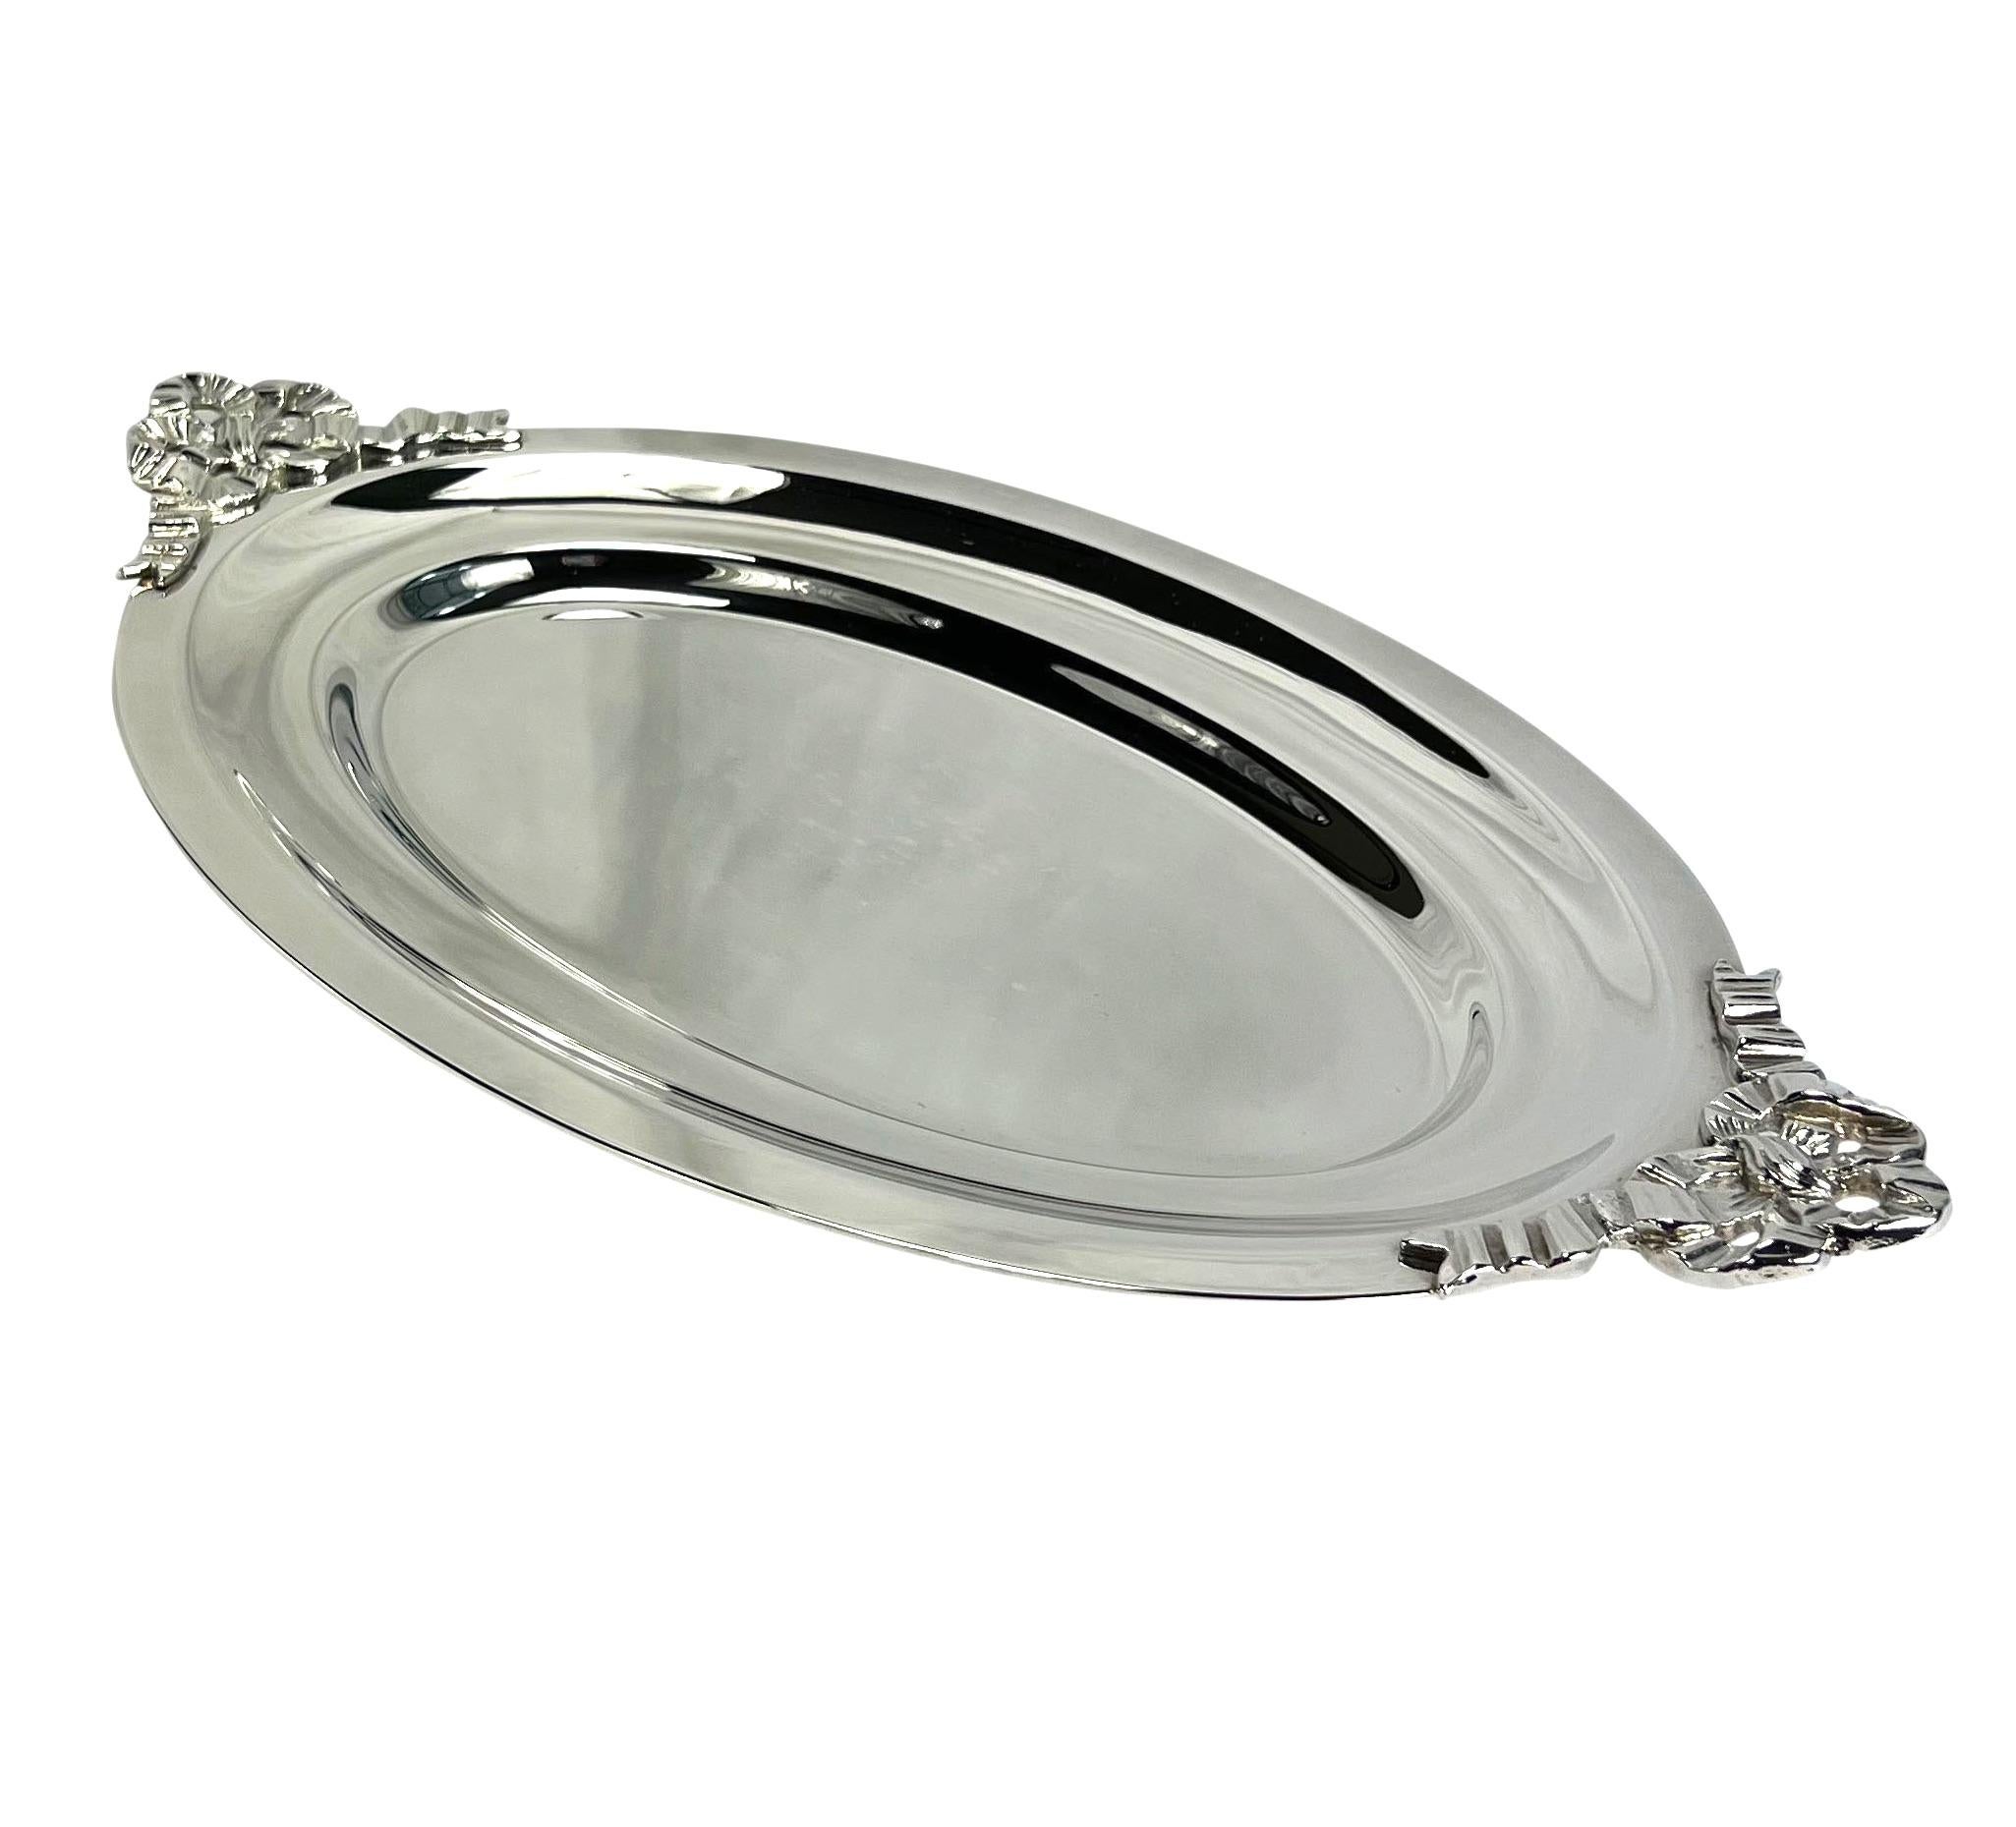 Presenting a beautiful oval silver plate Christian Dior serving plate. This vintage plate is perfect for serving or for decor and is made complete with ribbon handles and its original box!

Dimensions: 
Length: 13.75